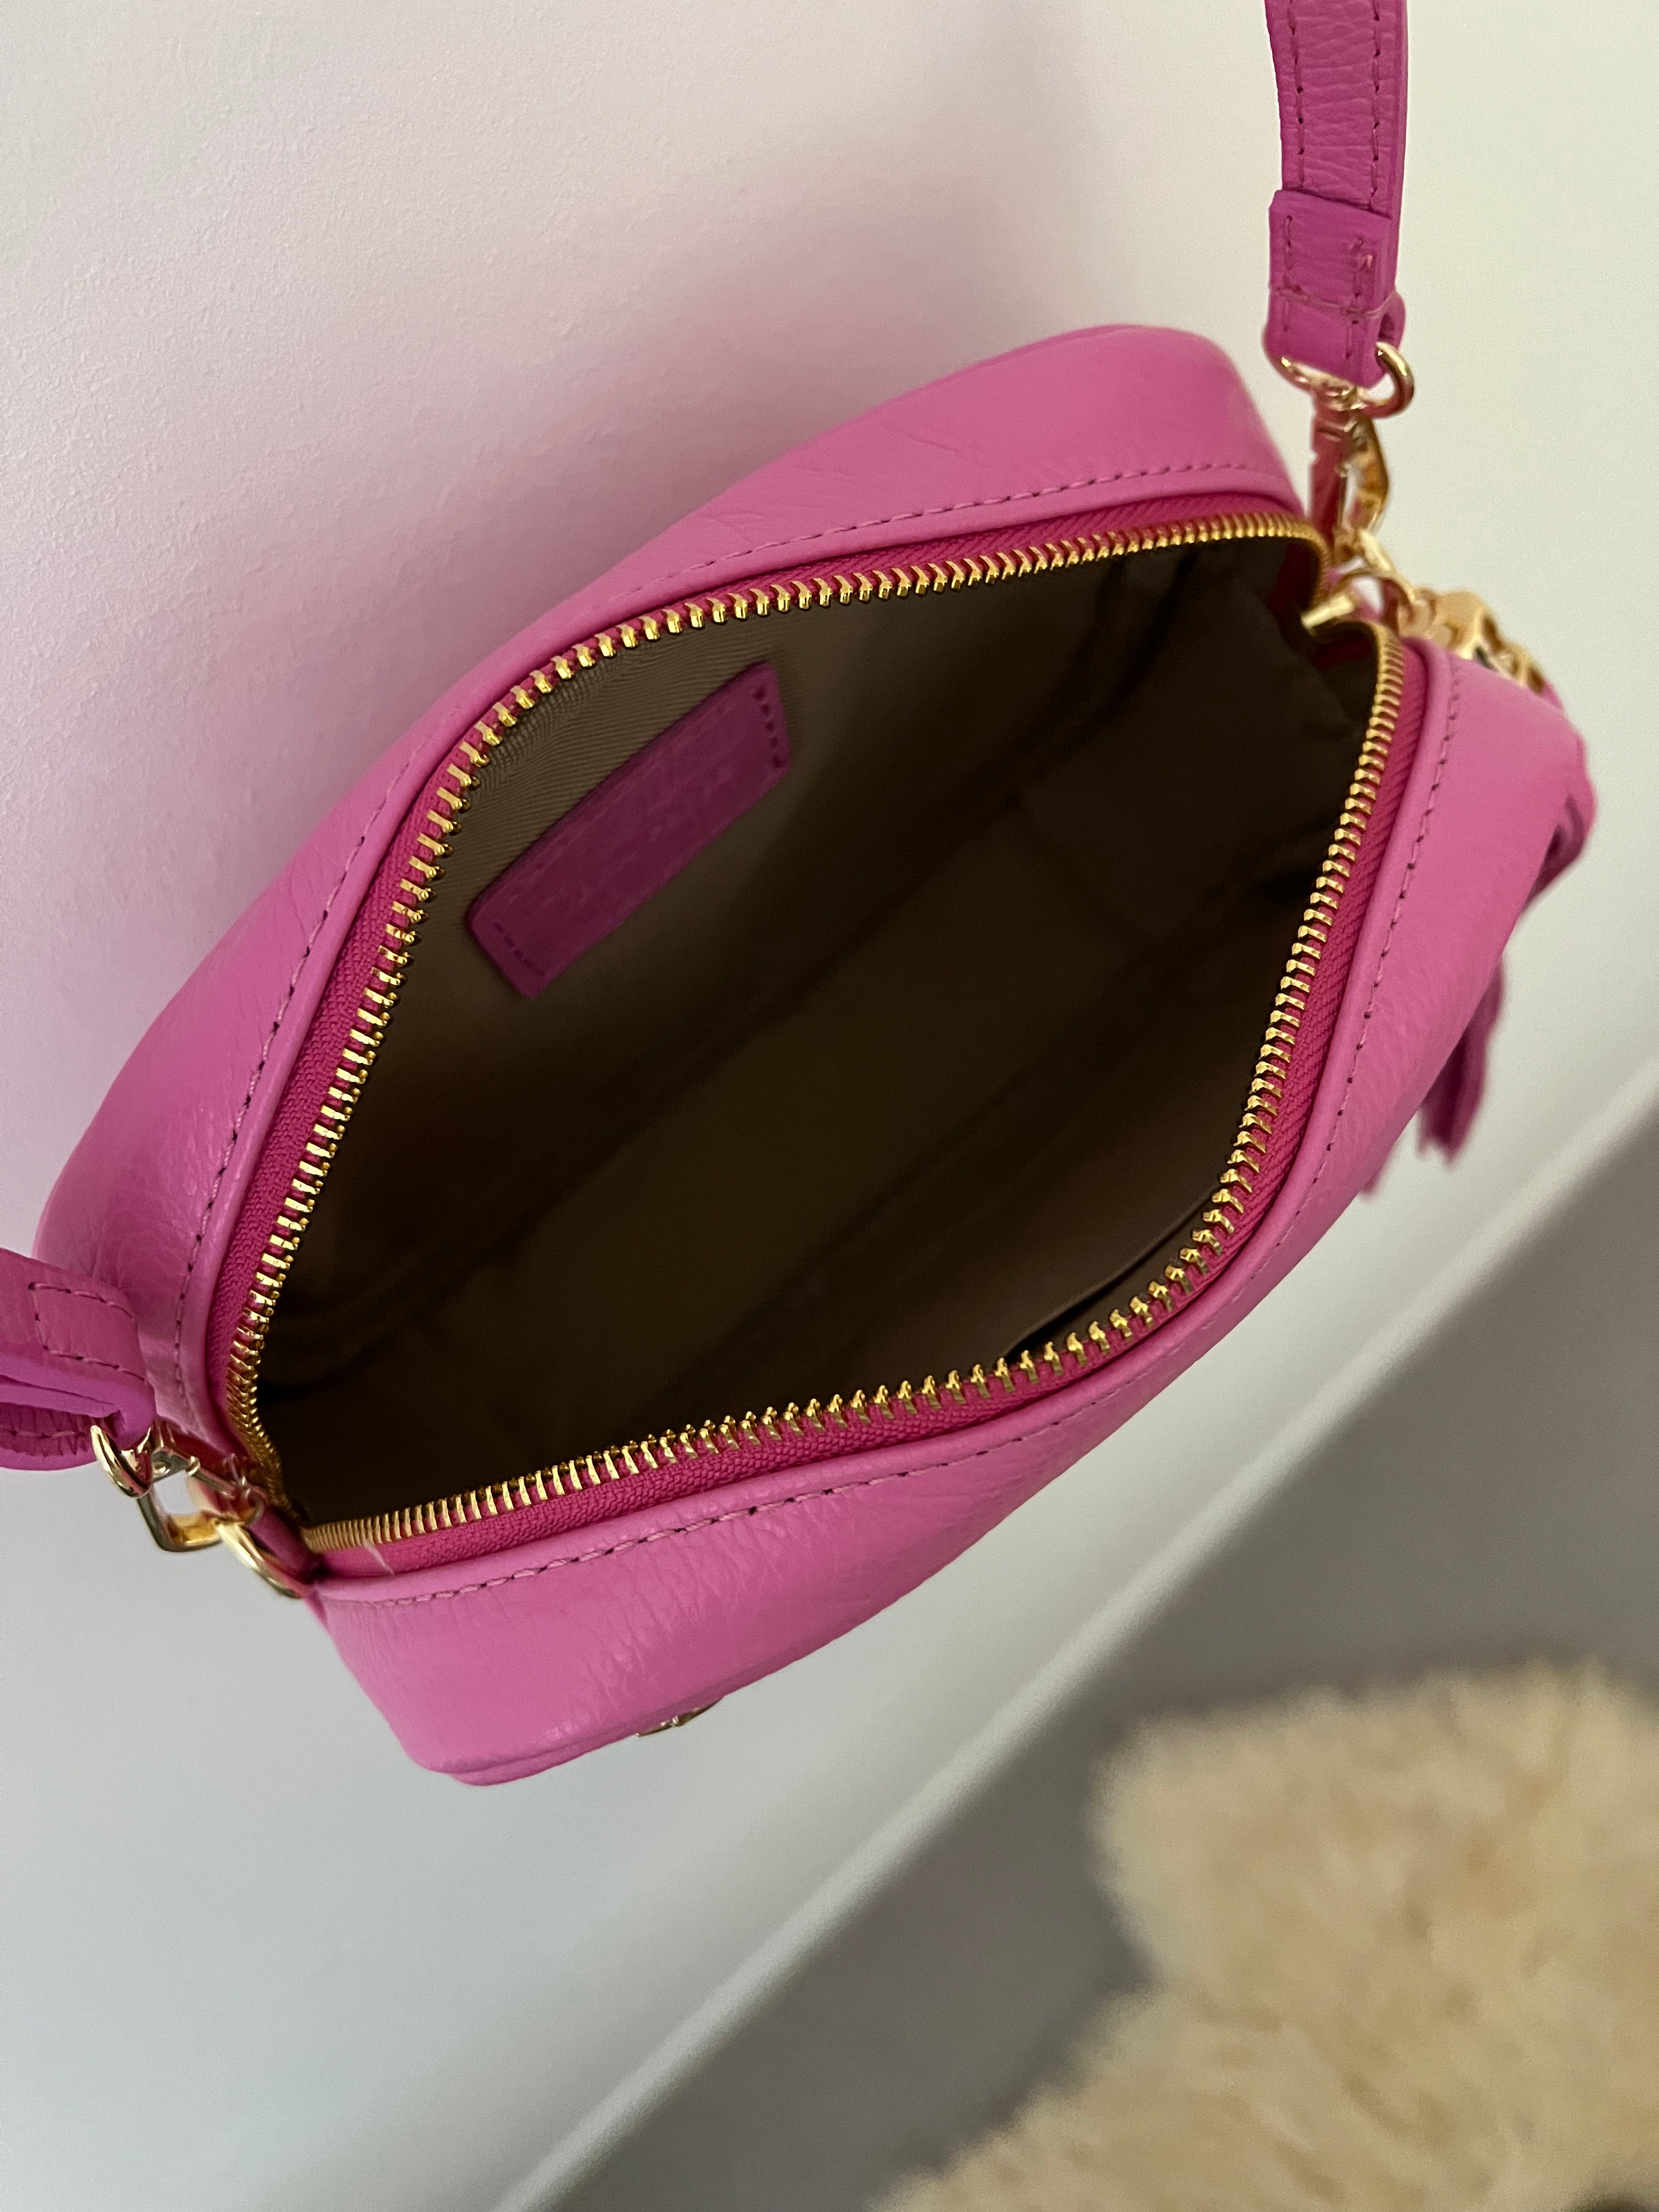 Leather Studded Crossbody Bag in Hot Pink